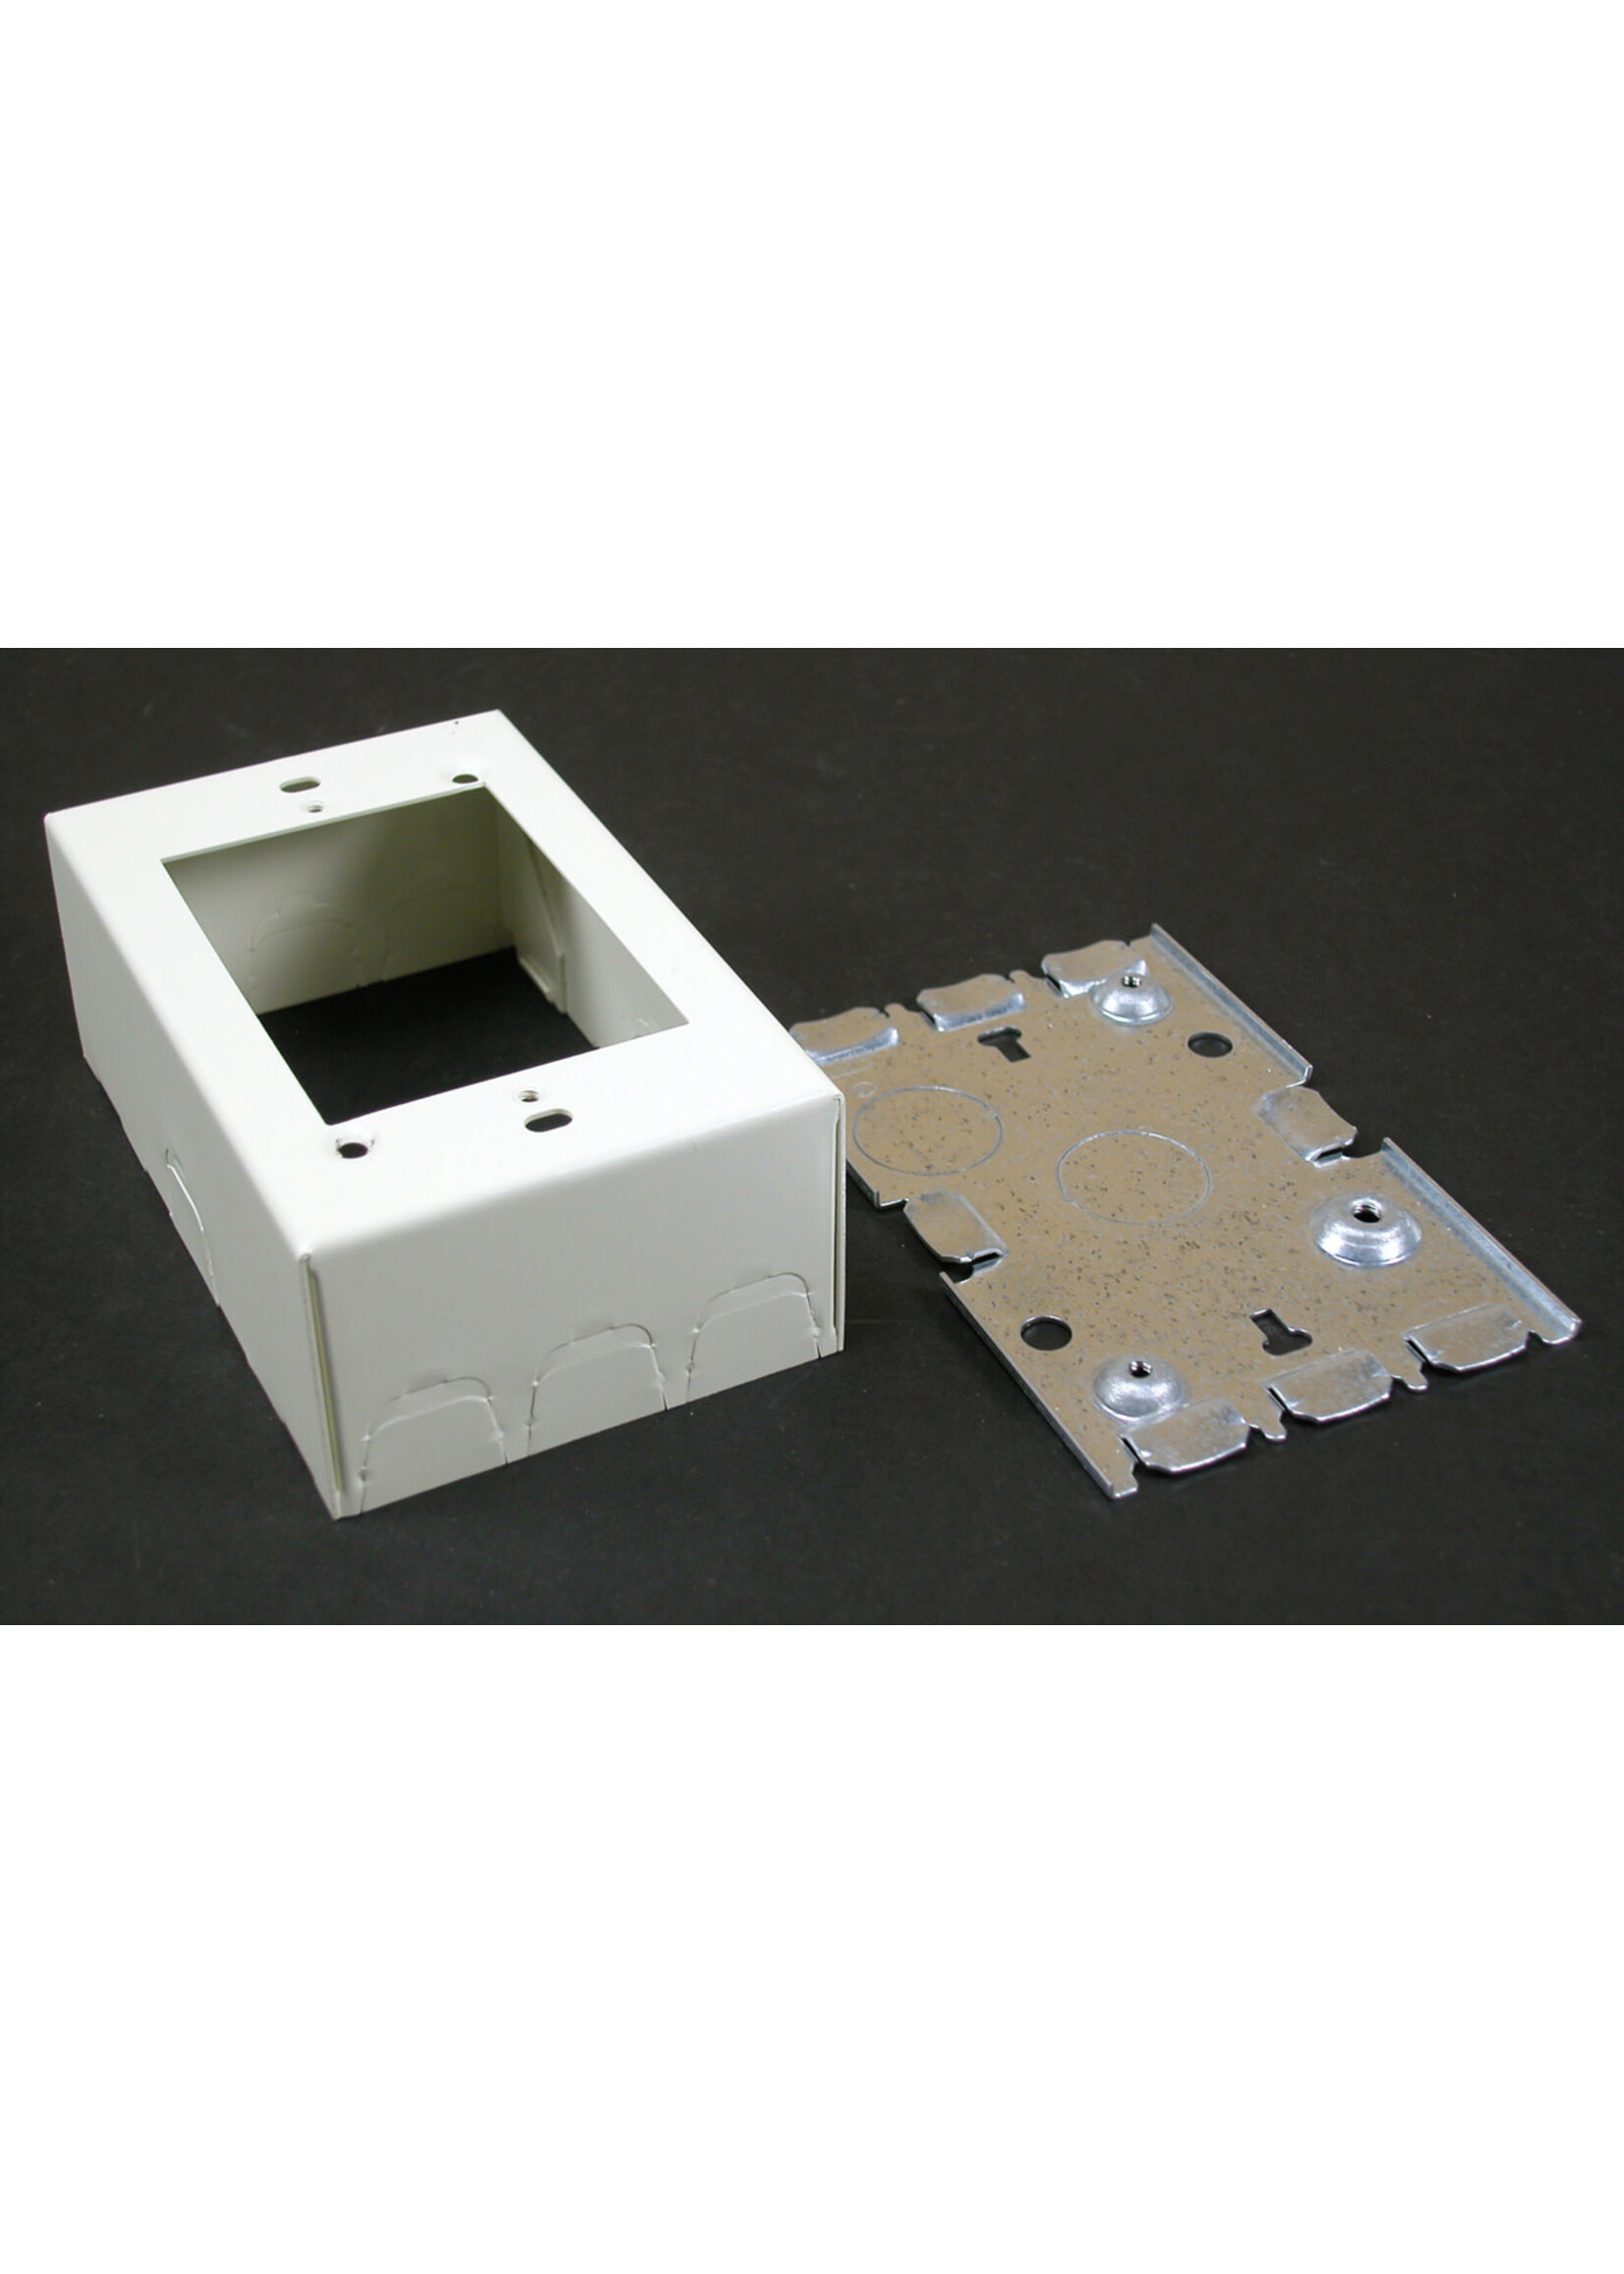 LEGRAND / WIREMOLD V5748 Wiremold 500/700 Series Single-Gang Switch and Receptacle Box Fitting, Ivory